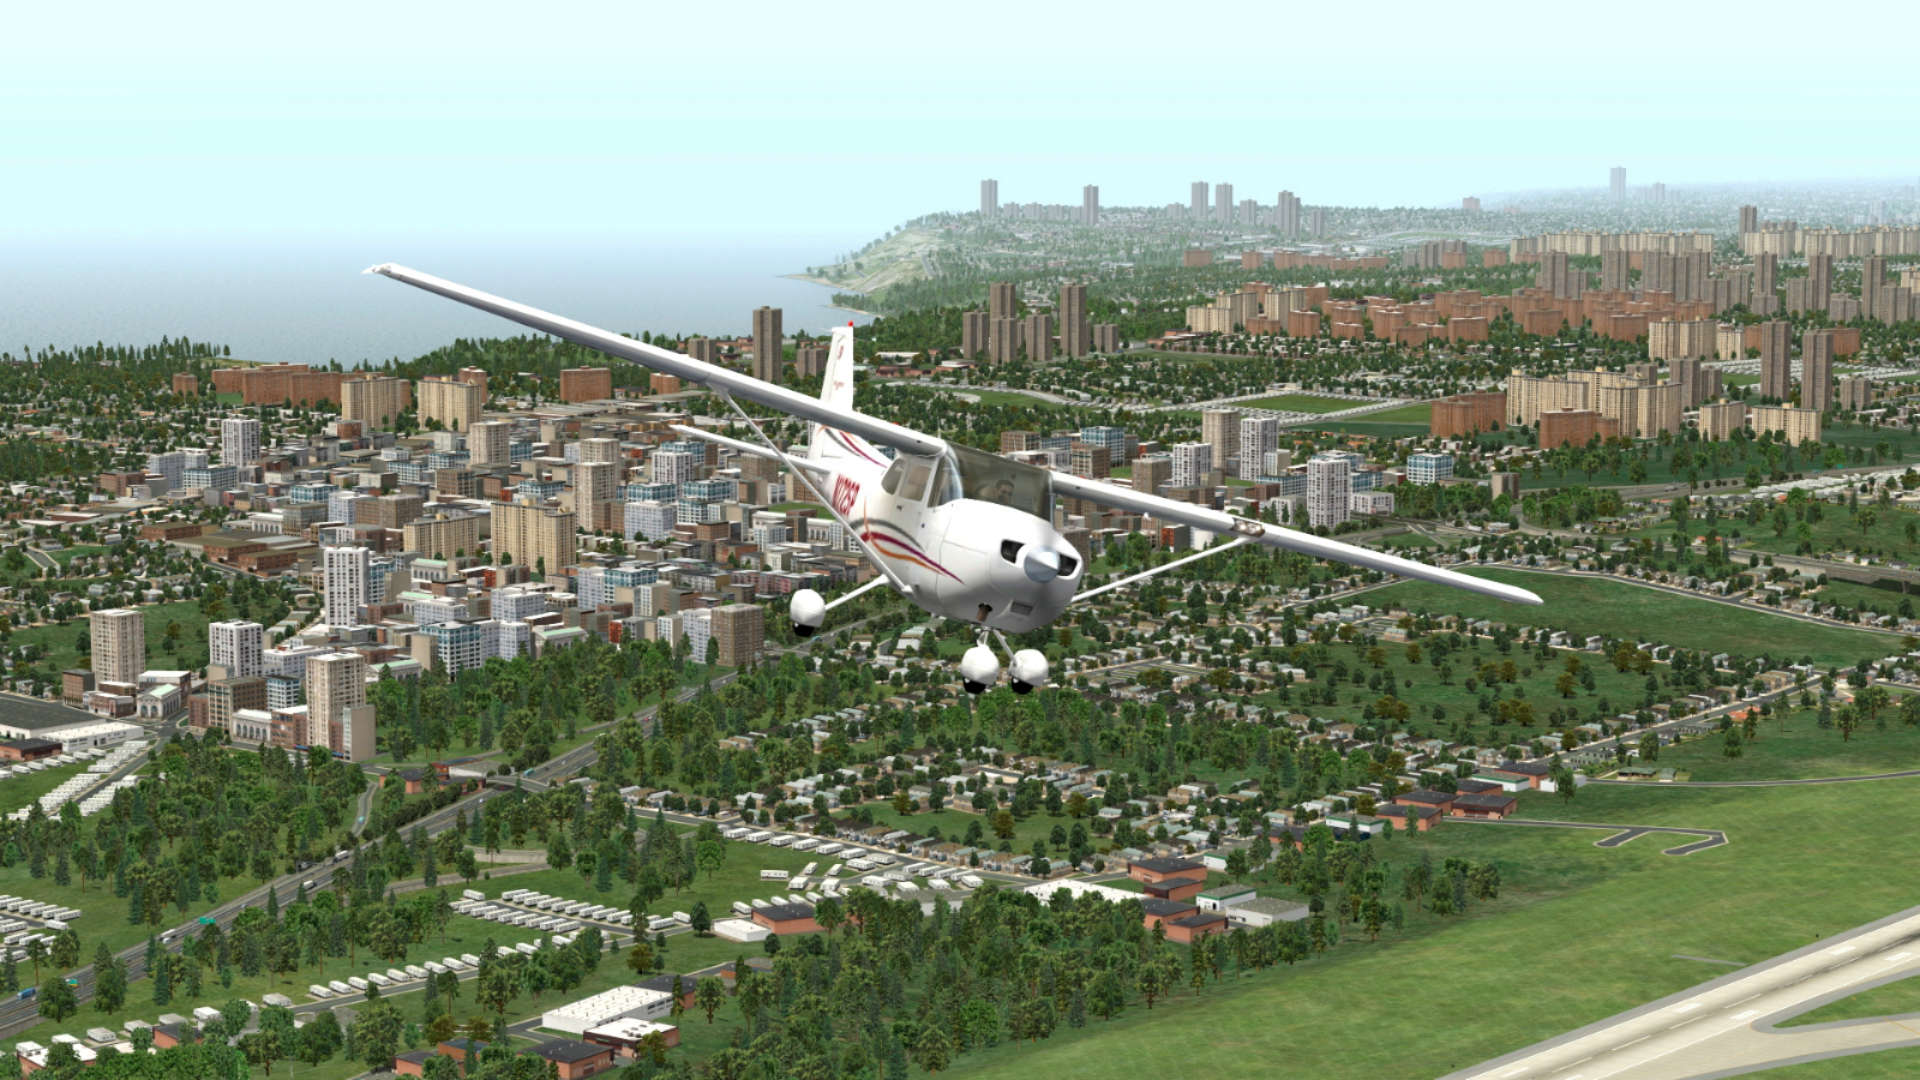 Best simulation games: X-Plane 10 Global. Image shows a plane in the sky.